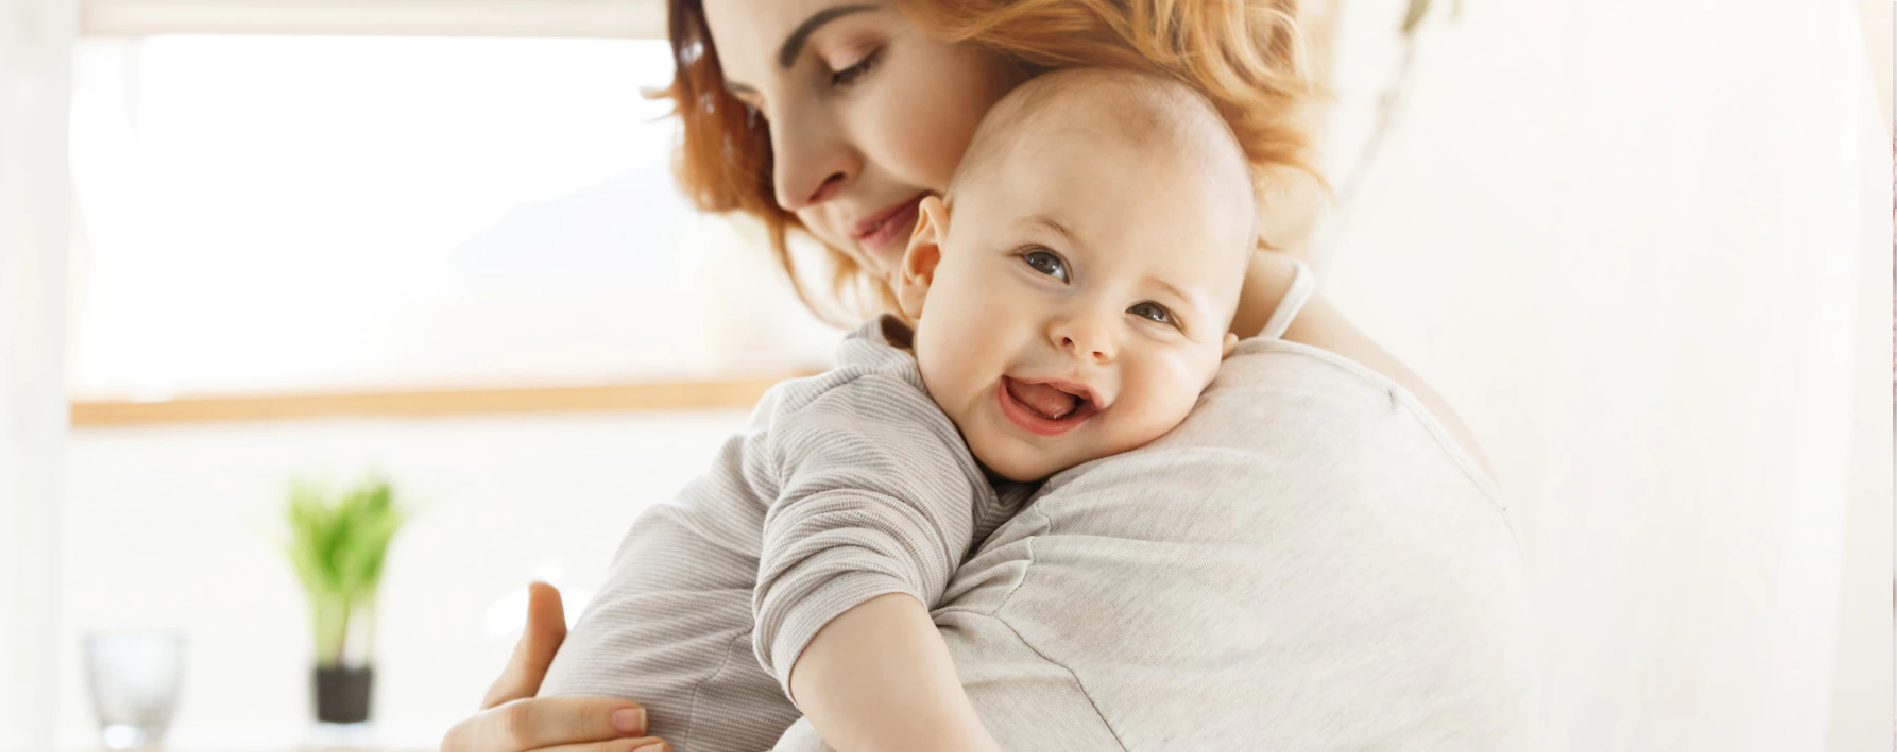 Top 10 tips for new mothers-to-be